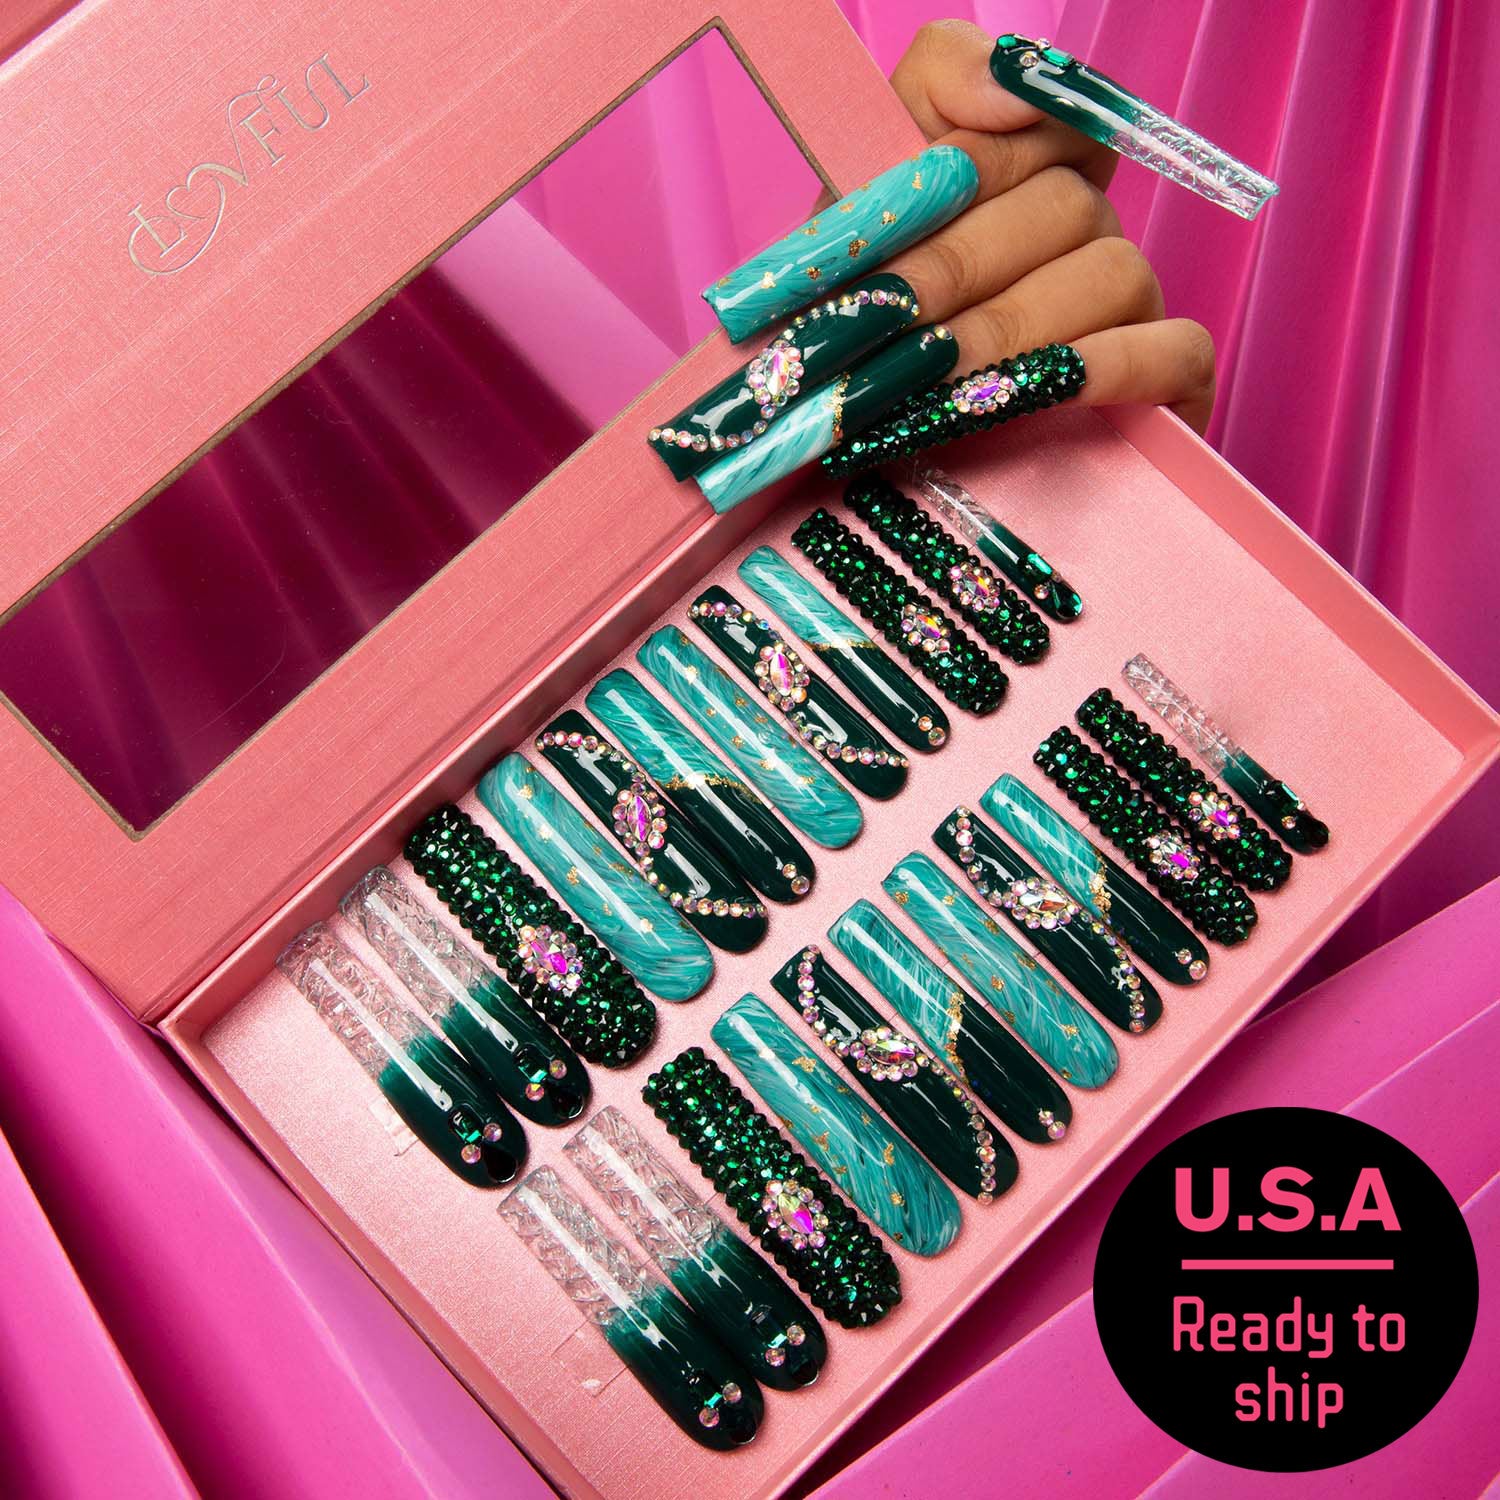 Lovful Emerald Envy Press-On Nails Set displayed in a pink box with 24 pieces, featuring intricate emerald green and gold designs, with a hand model showing some nails. U.S.A Ready to ship sticker on the bottom right.